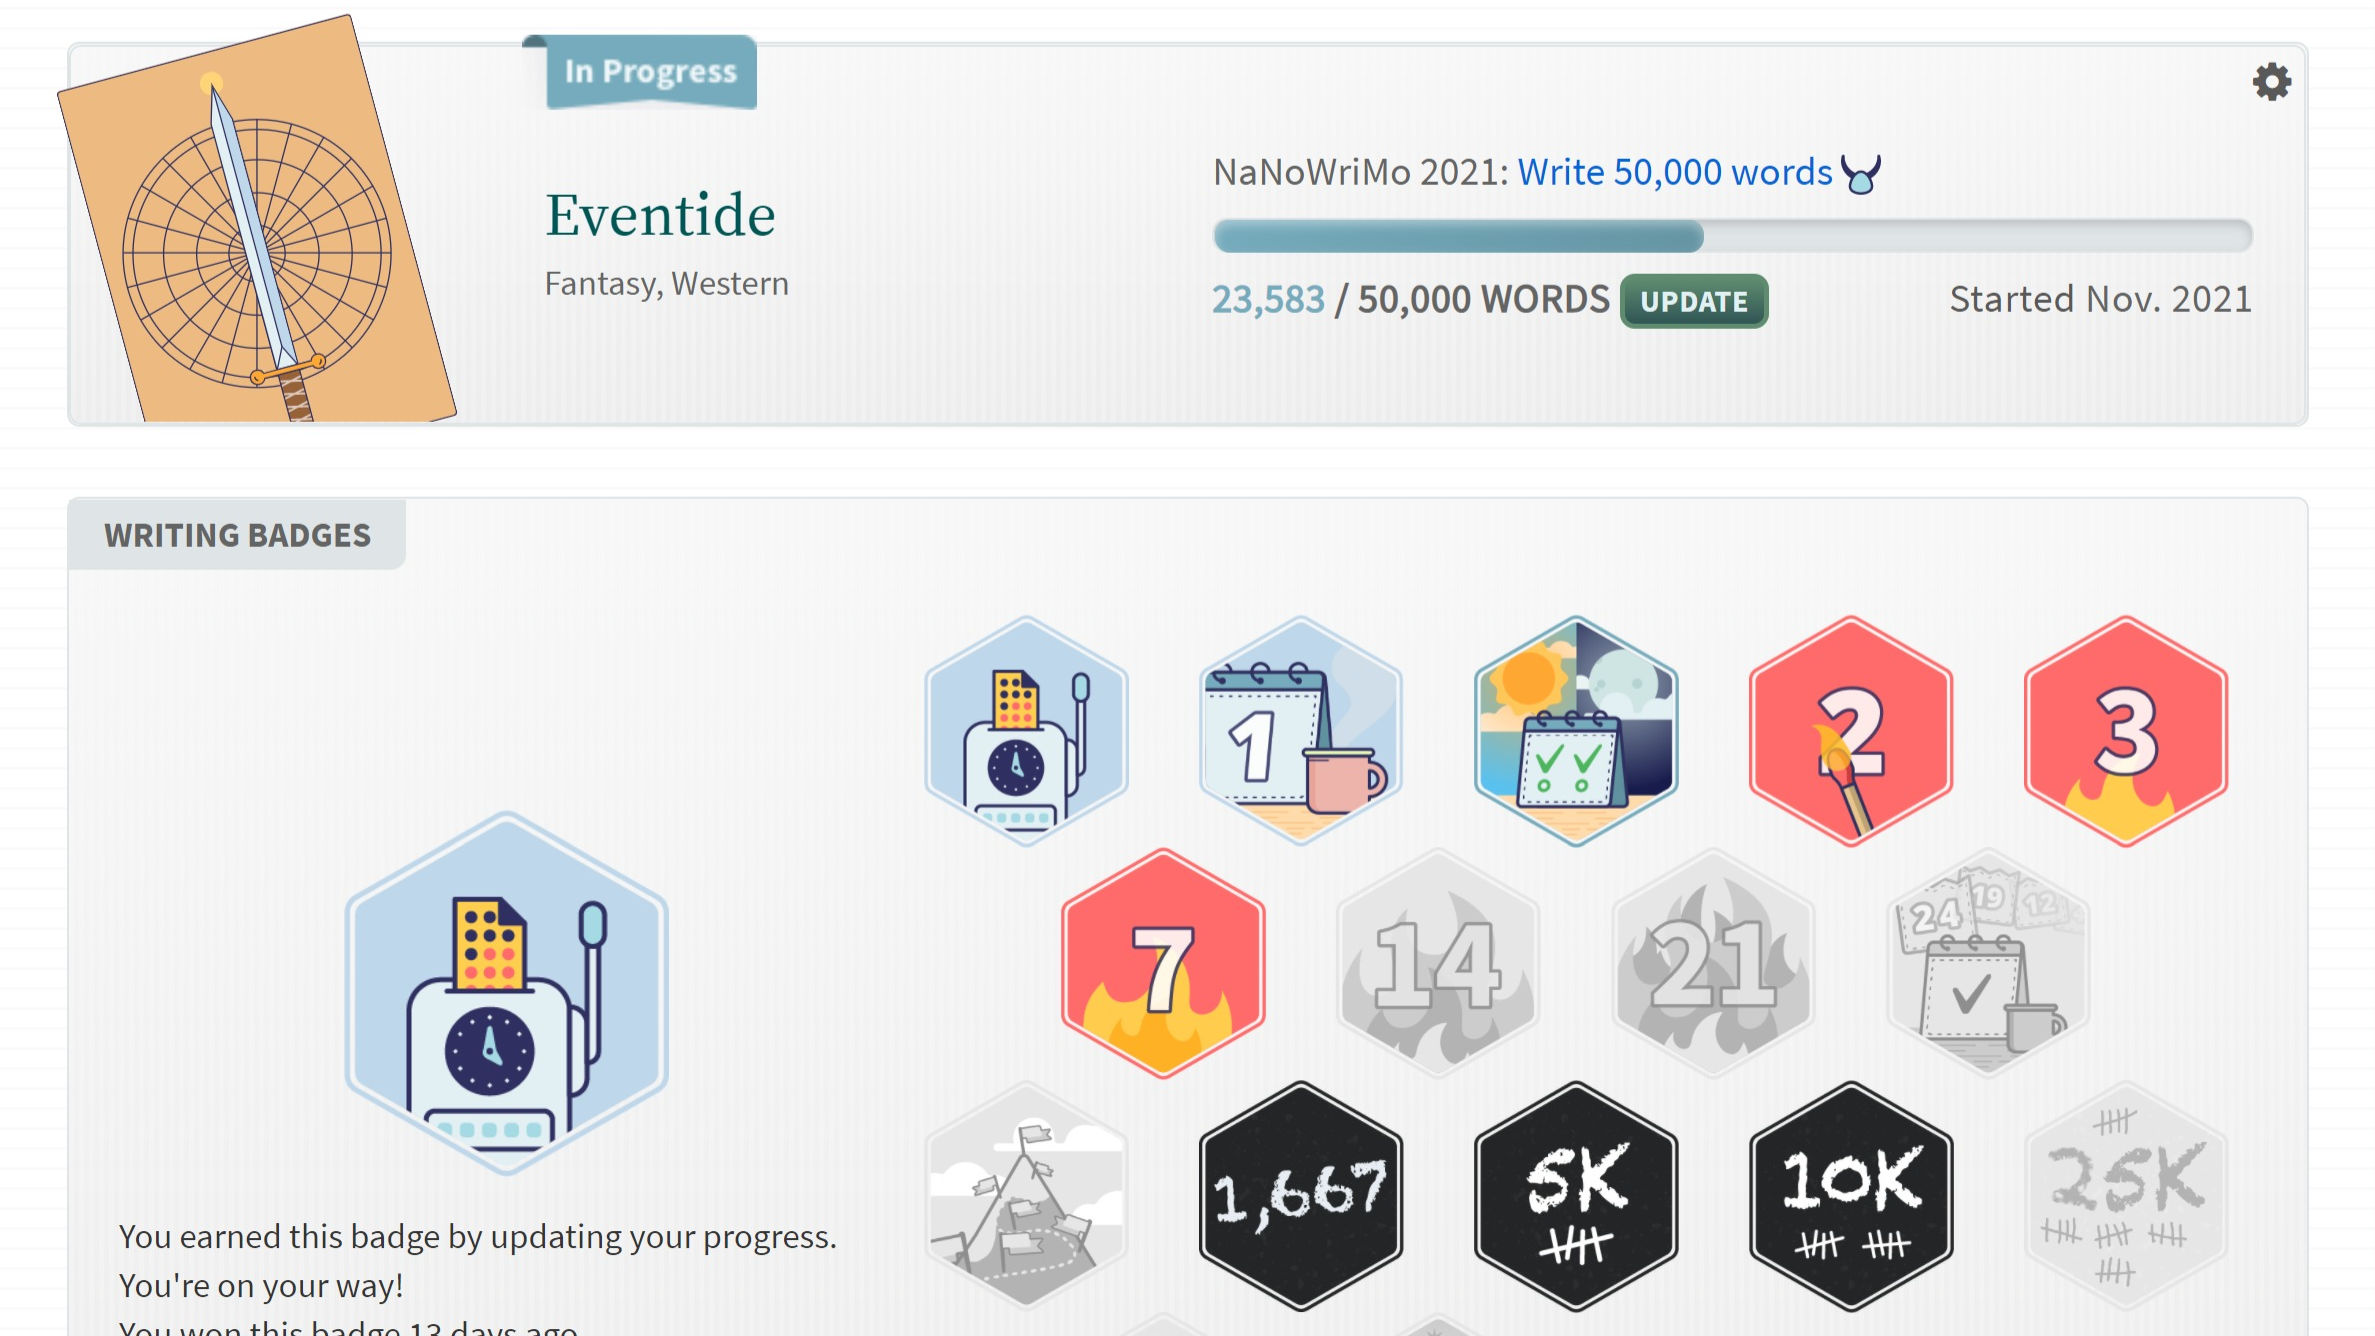 Screenshot of my NaNoWriMo profile, which shows stats and badges.